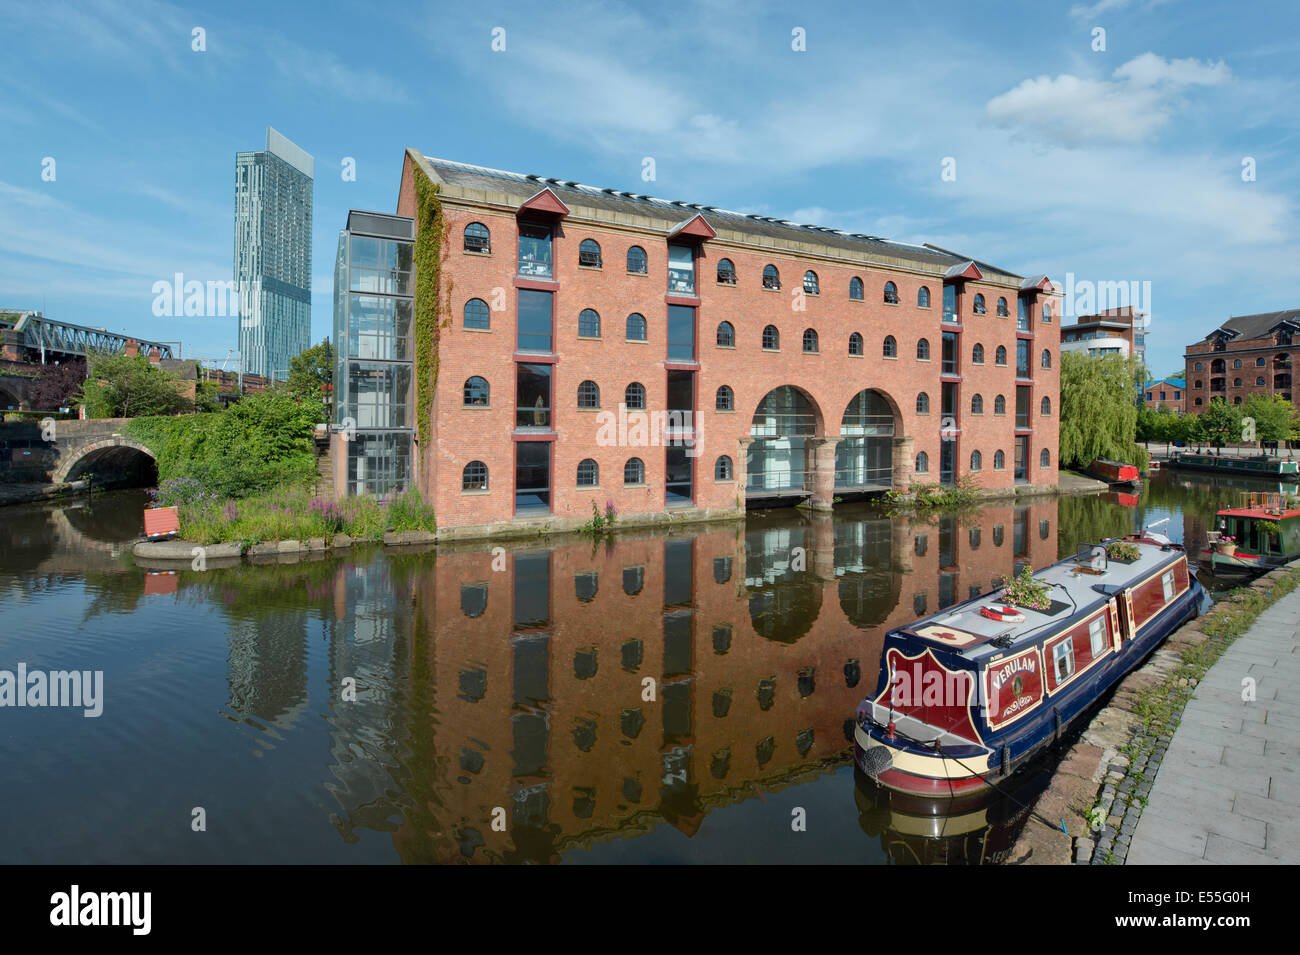 The Castlefield Urban Heritage Park and historic inner city canal conservation area with Beetham Tower in Manchester, UK. Stock Photo